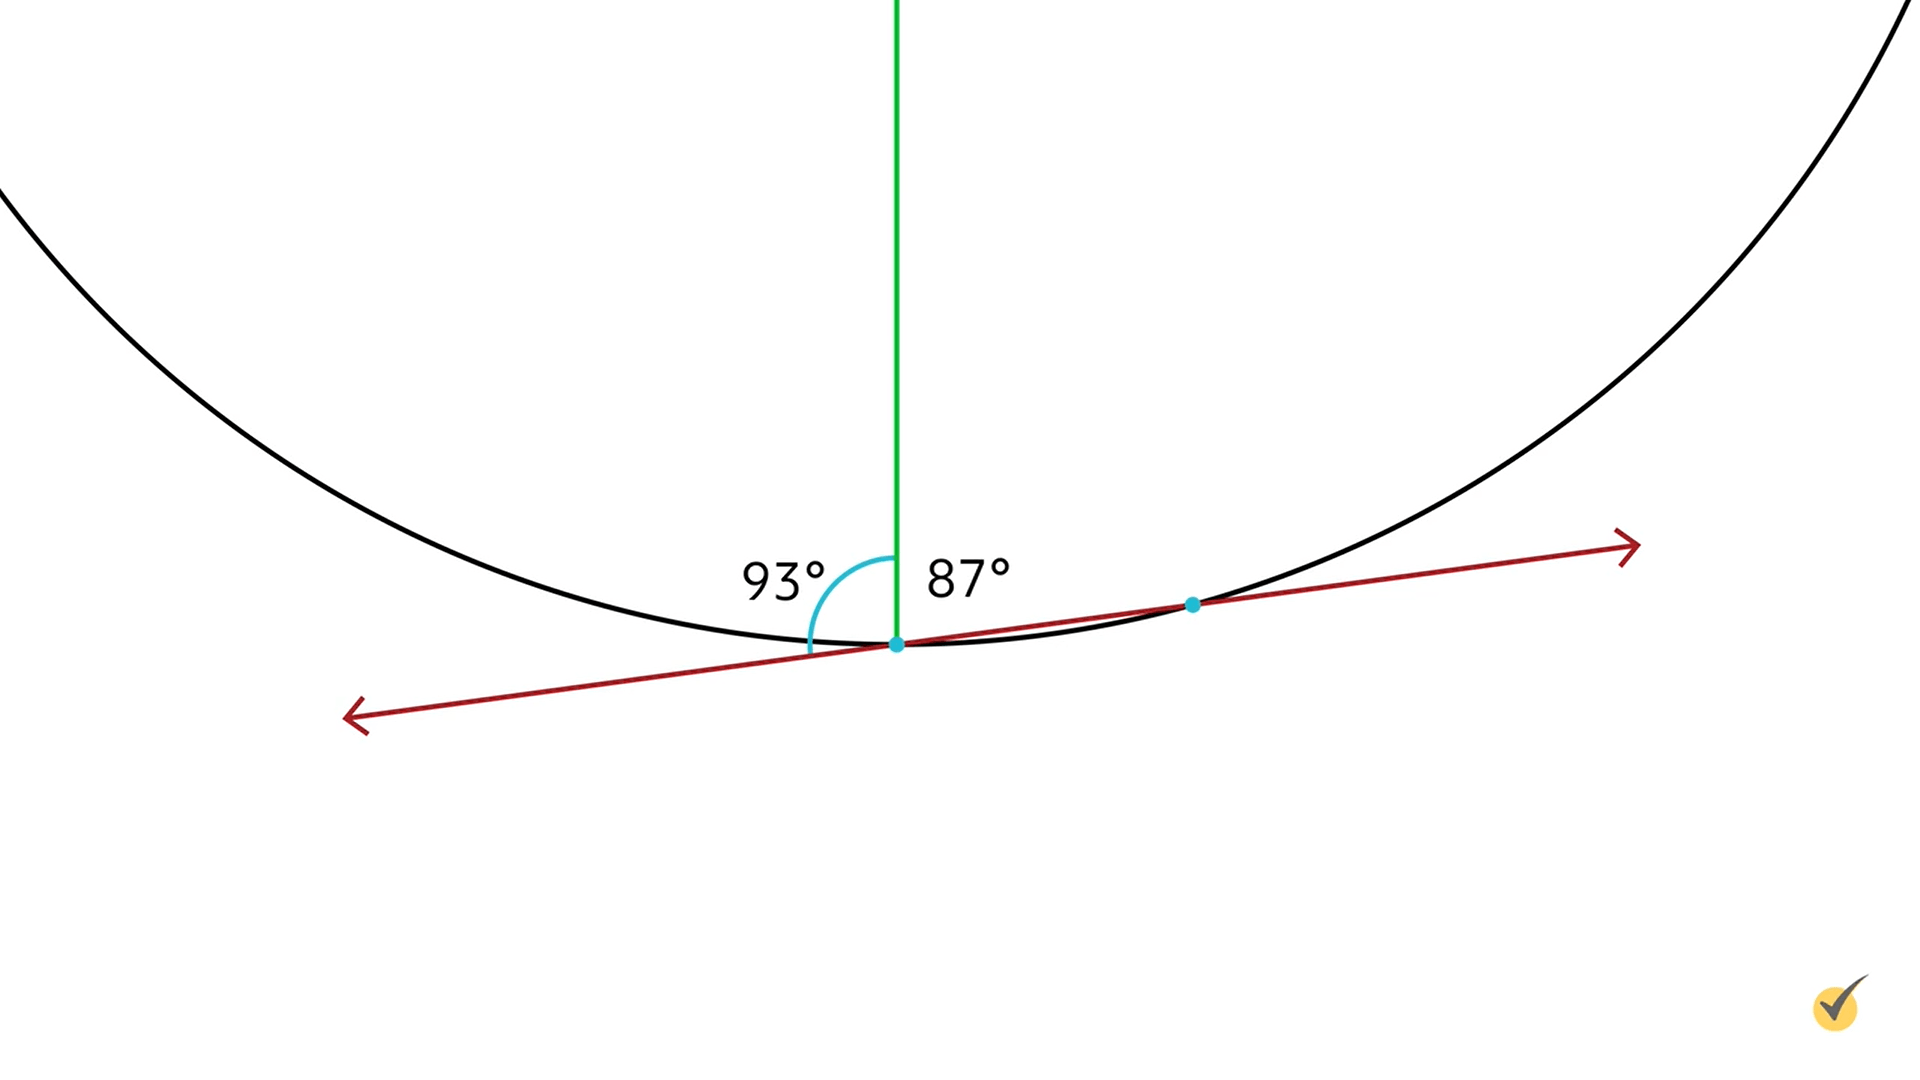 Image of secant interacting with a curve, which is at 93 degrees.